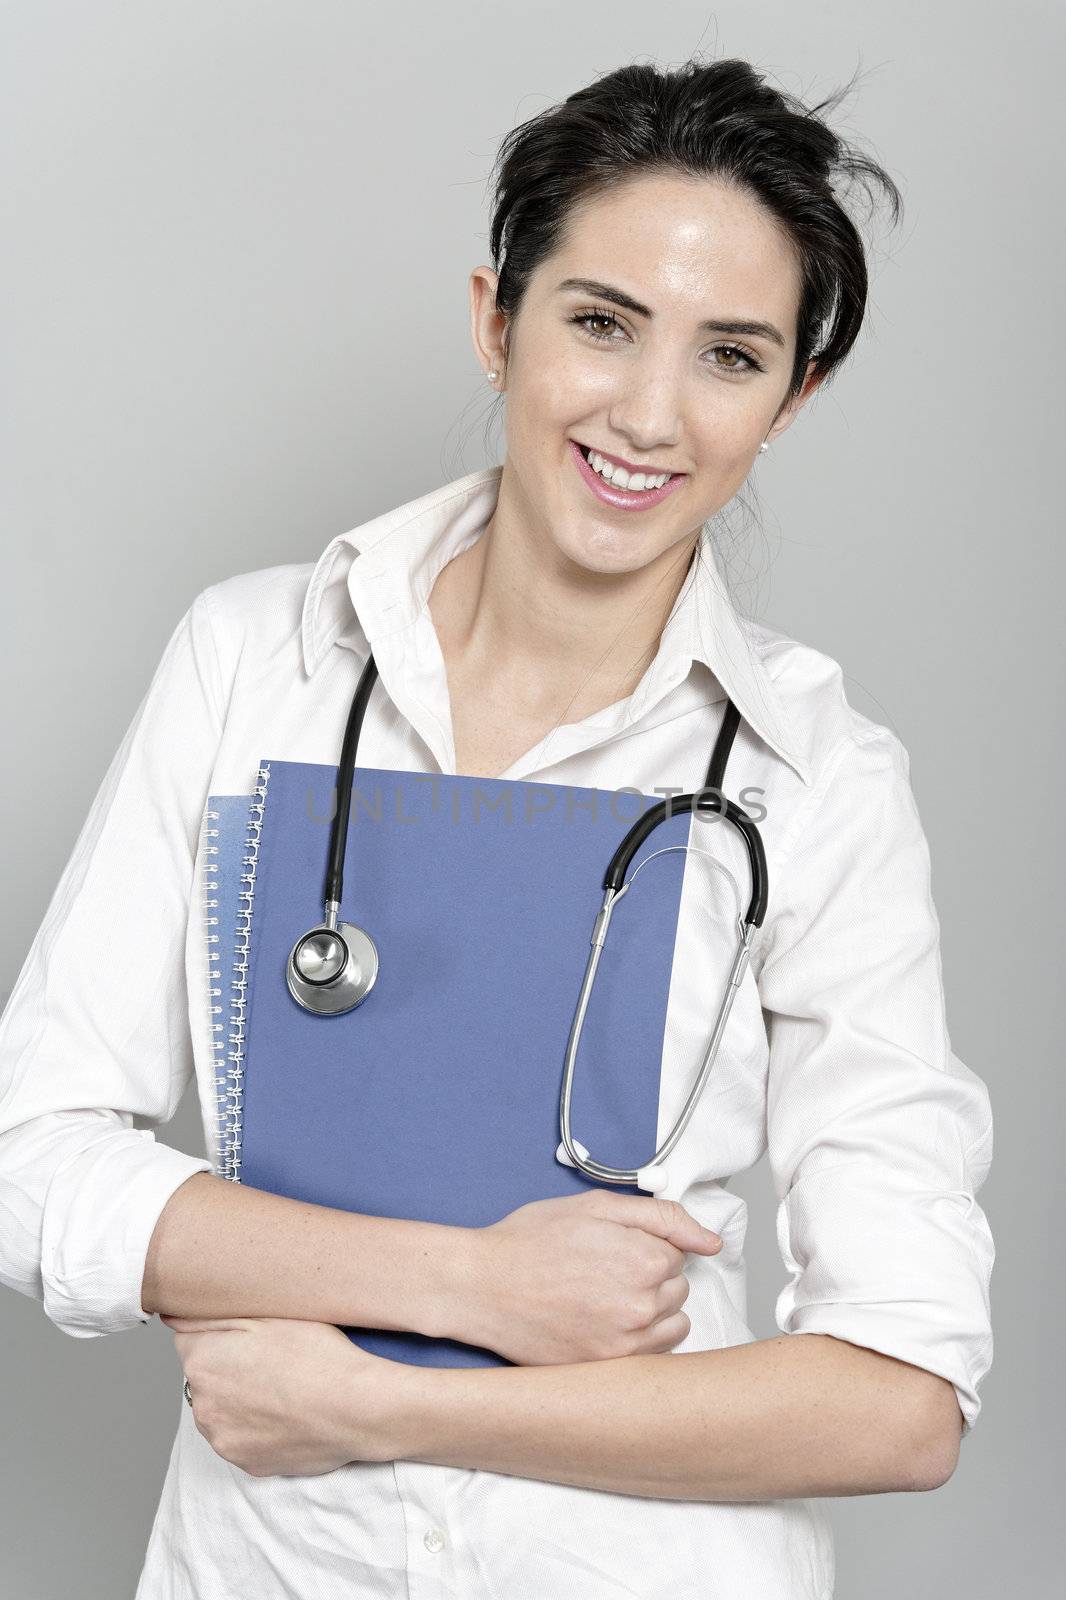 Woman doctor with stethoscope by studiofi